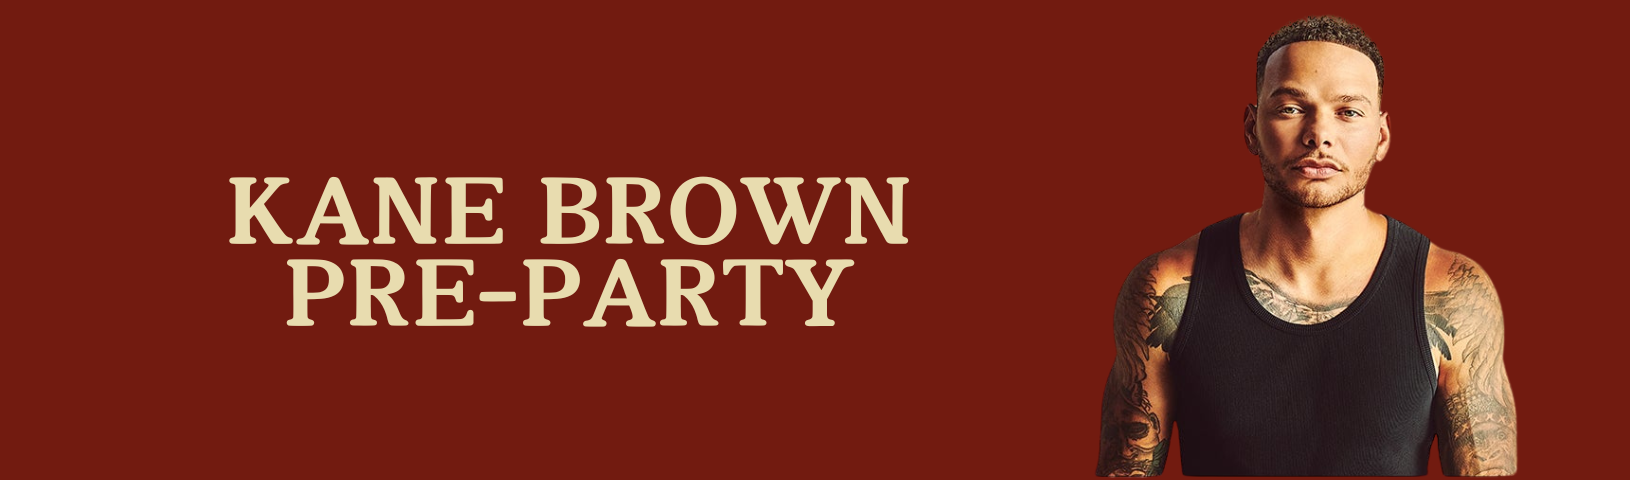 KANE BROWN PRE-PARTY Background Image